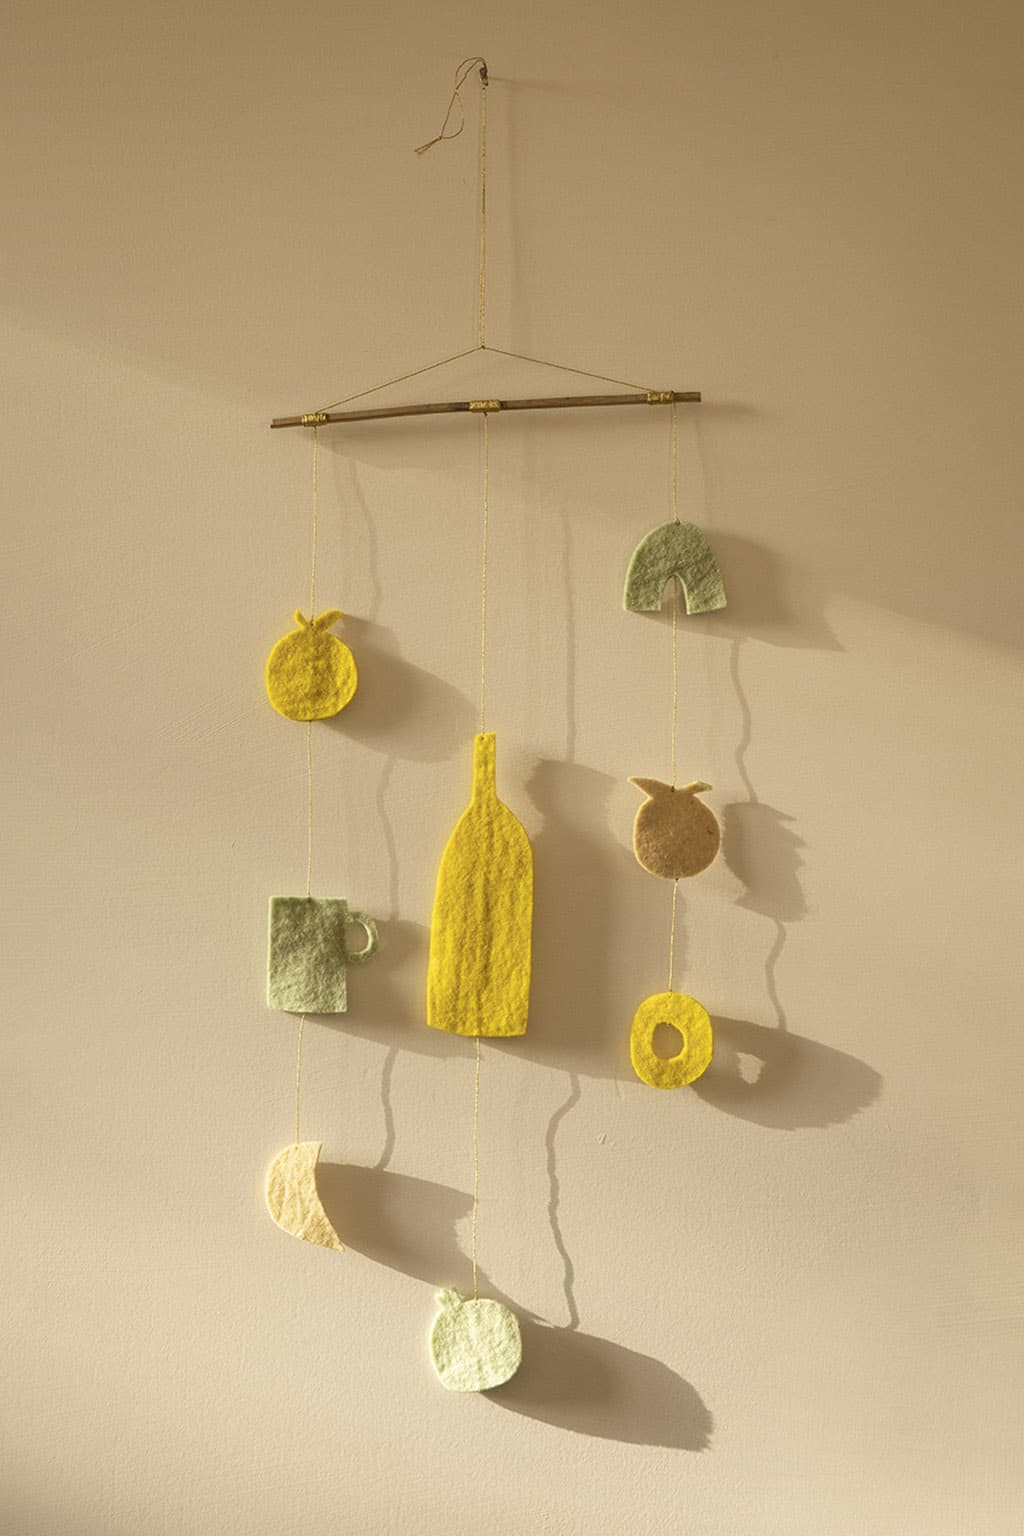 A colourful, handmade felt mobile to liven up your home decor